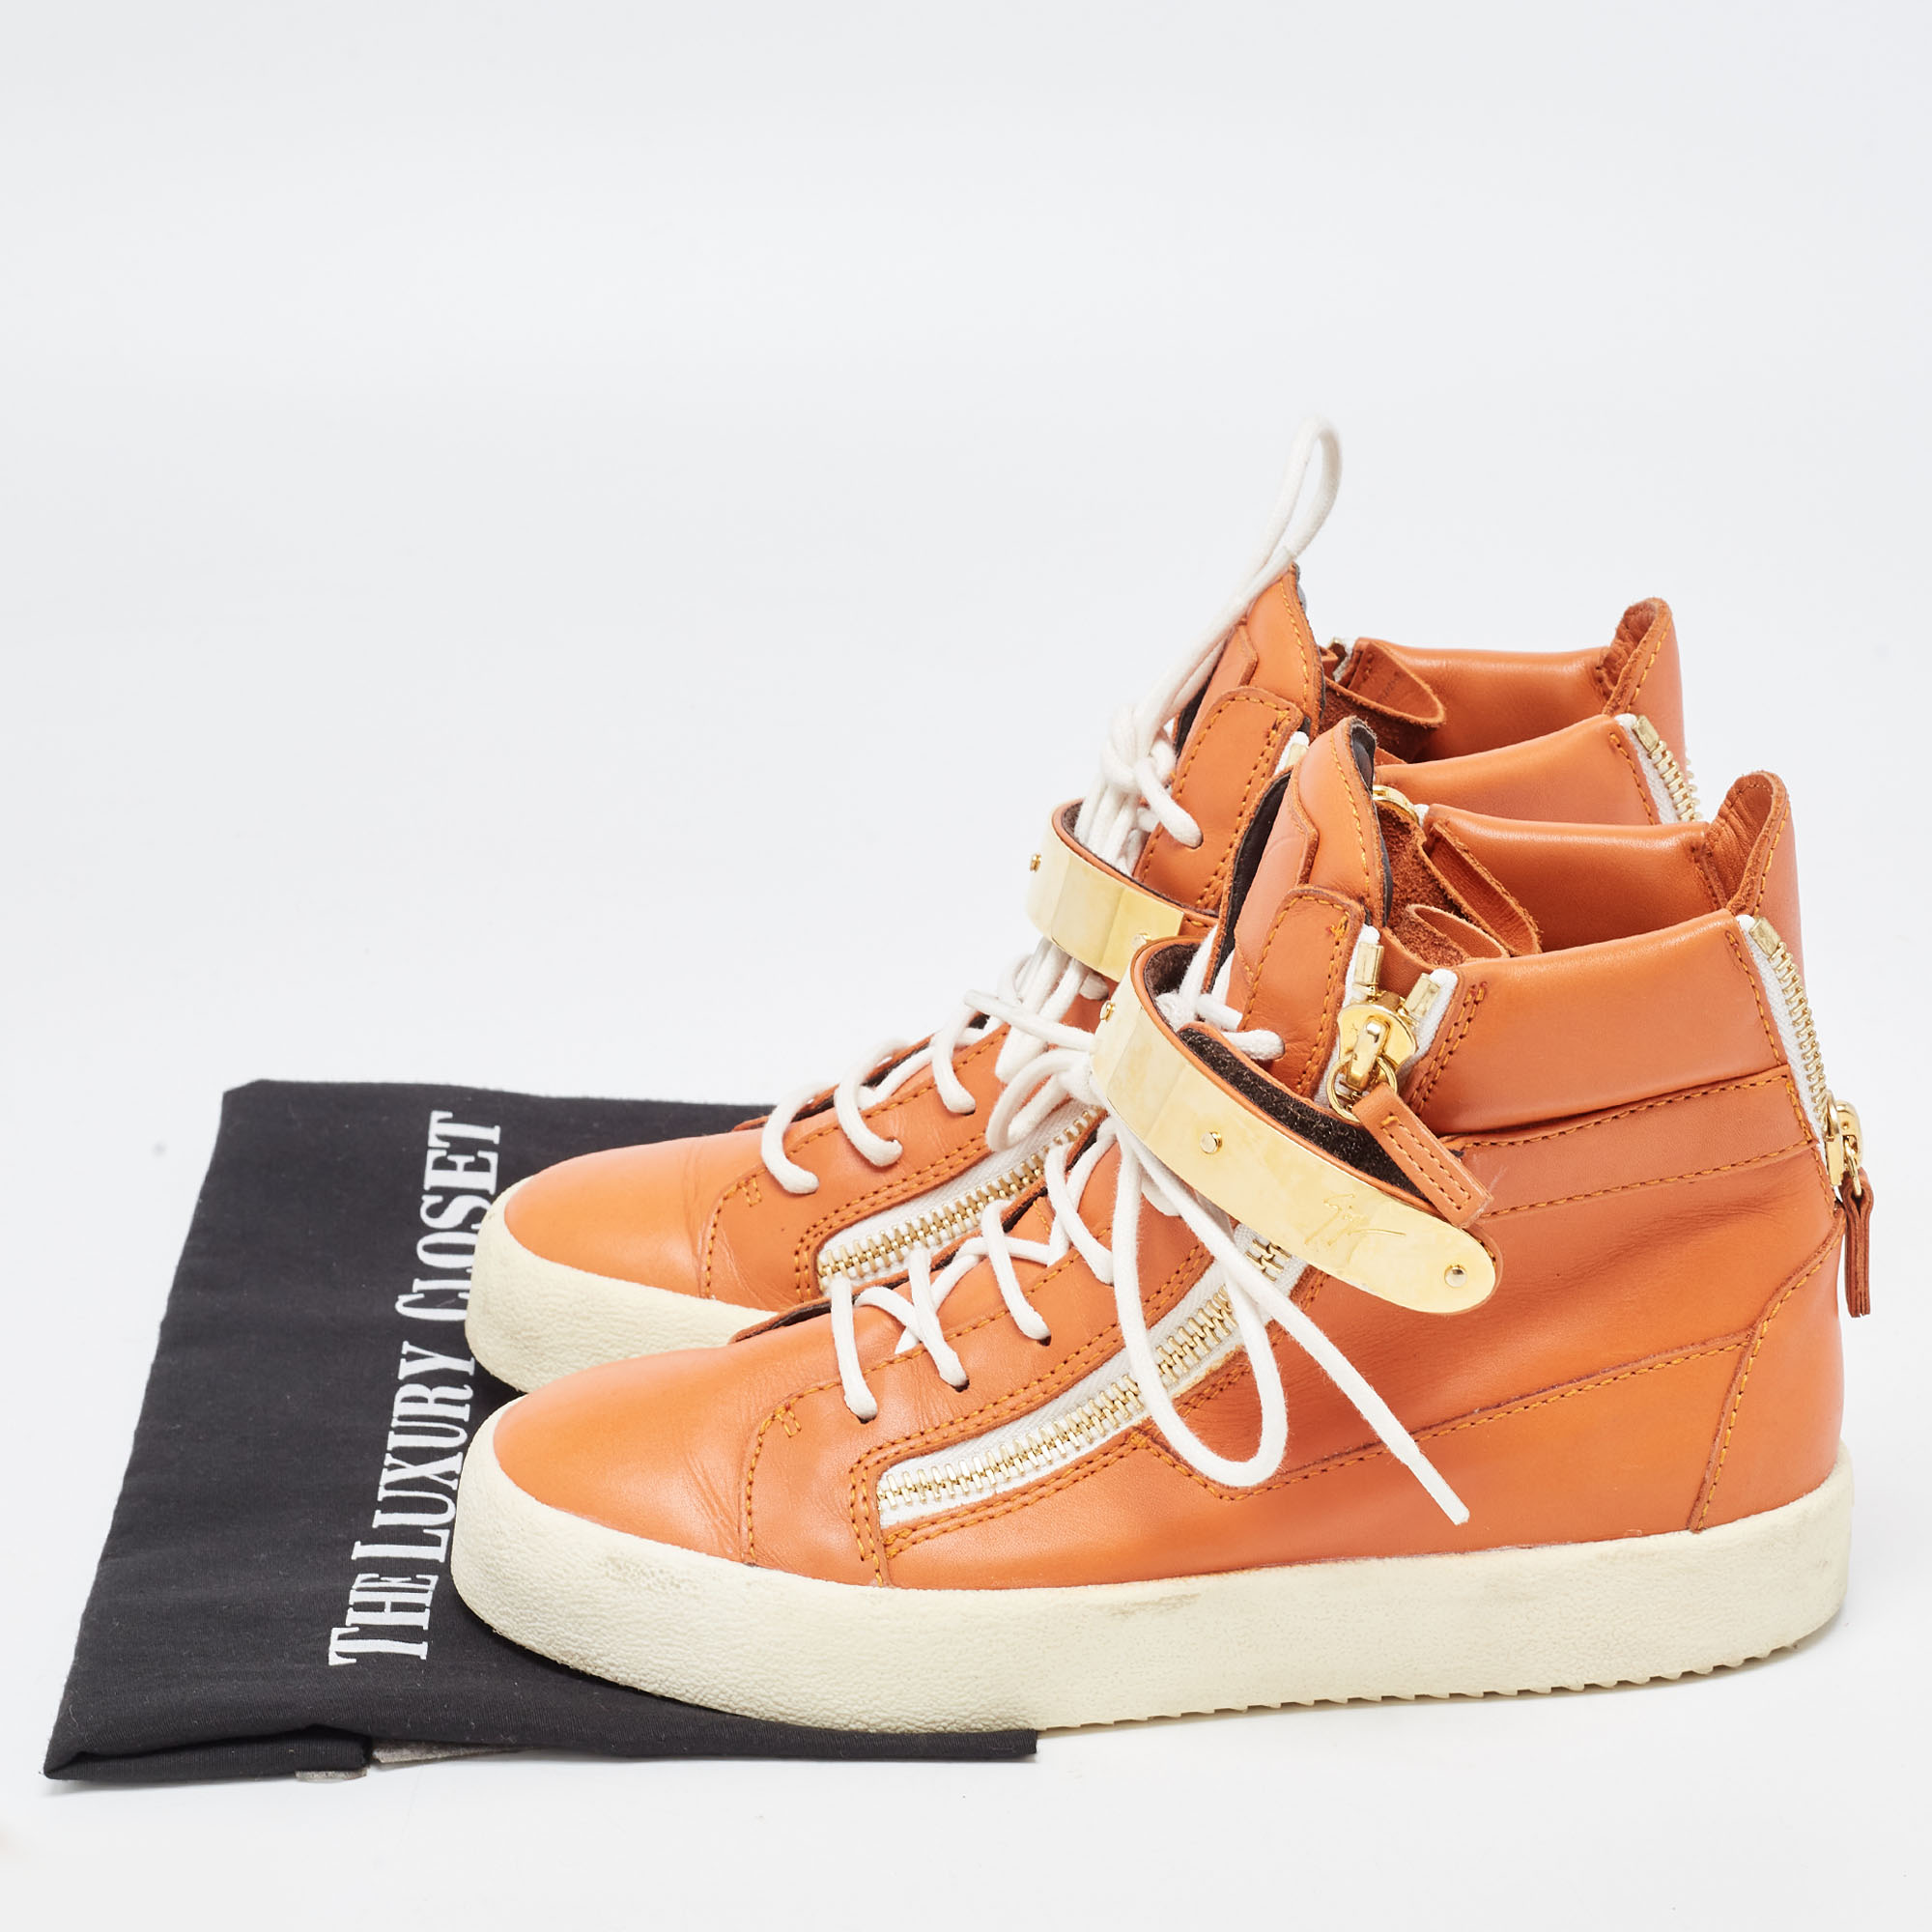 Giuseppe Zanotti Orange Leather Coby High Top Sneakers Size 38